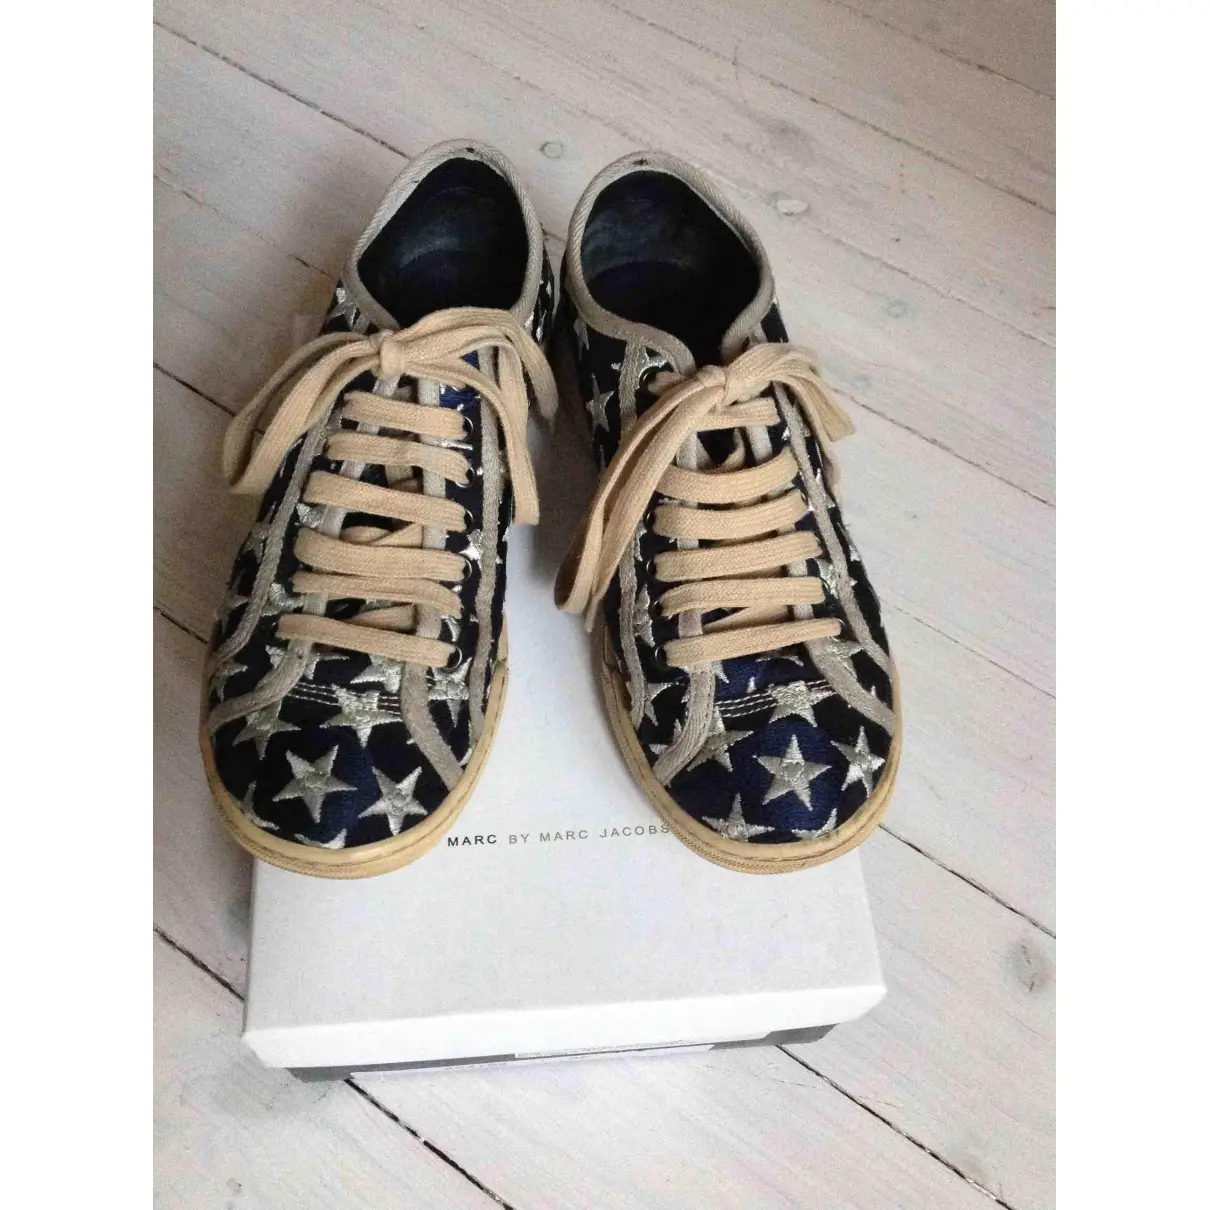 Buy Marc by Marc Jacobs Cloth trainers online